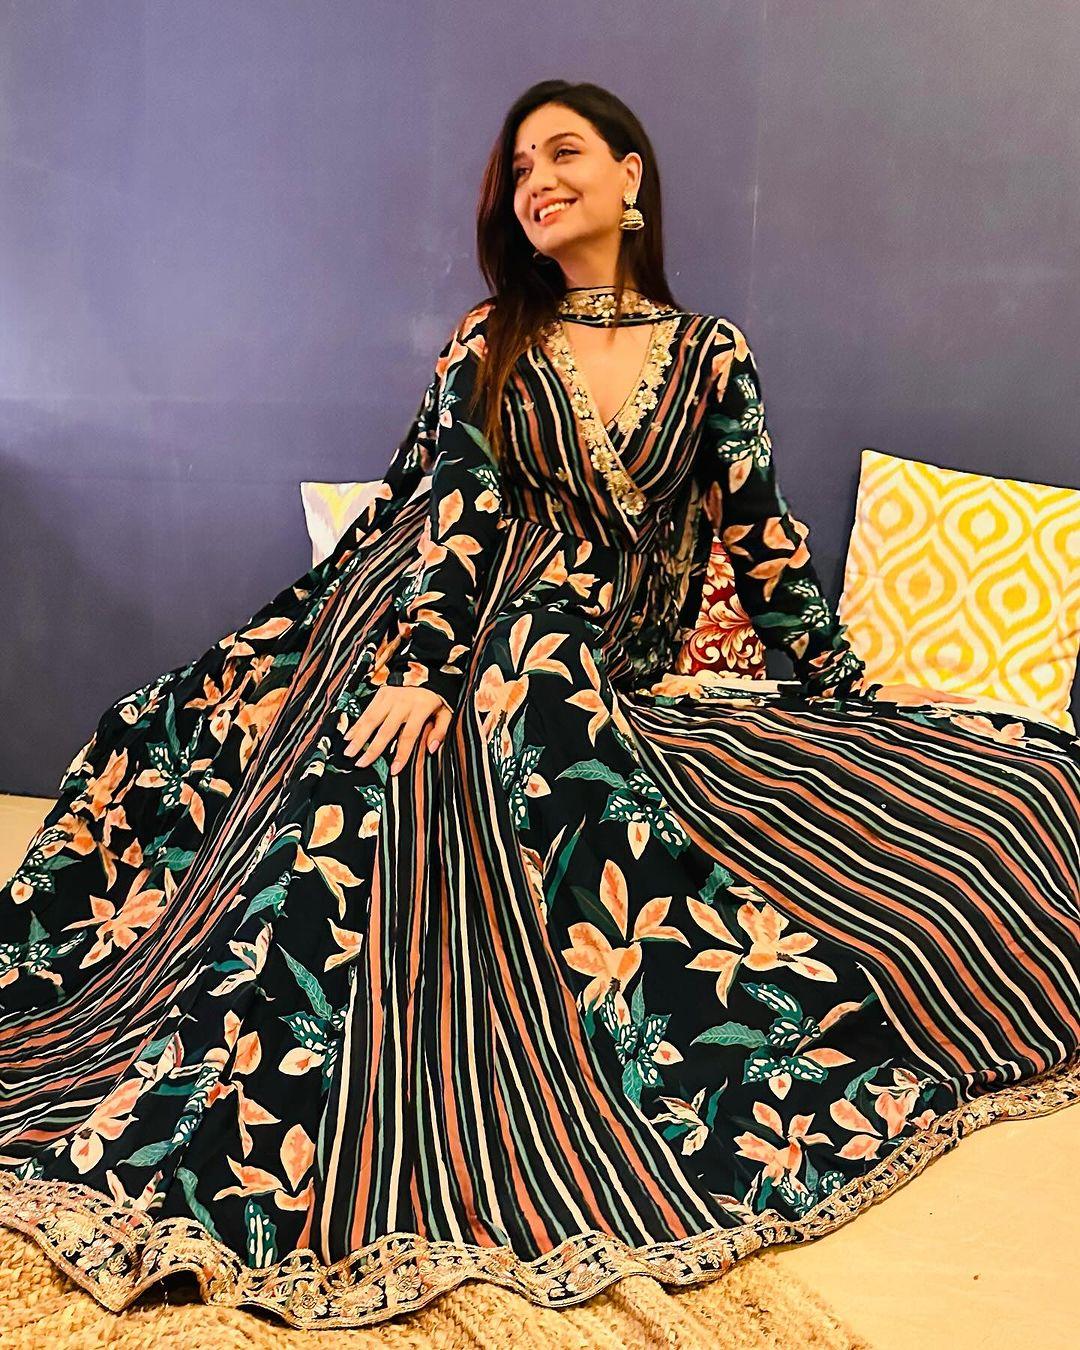 The soon-to-be bride, Divya Agrawal is seen donning a black Anarkali with multicoloured stripes and floral prints. She paired it with golden-coloured jhumkas